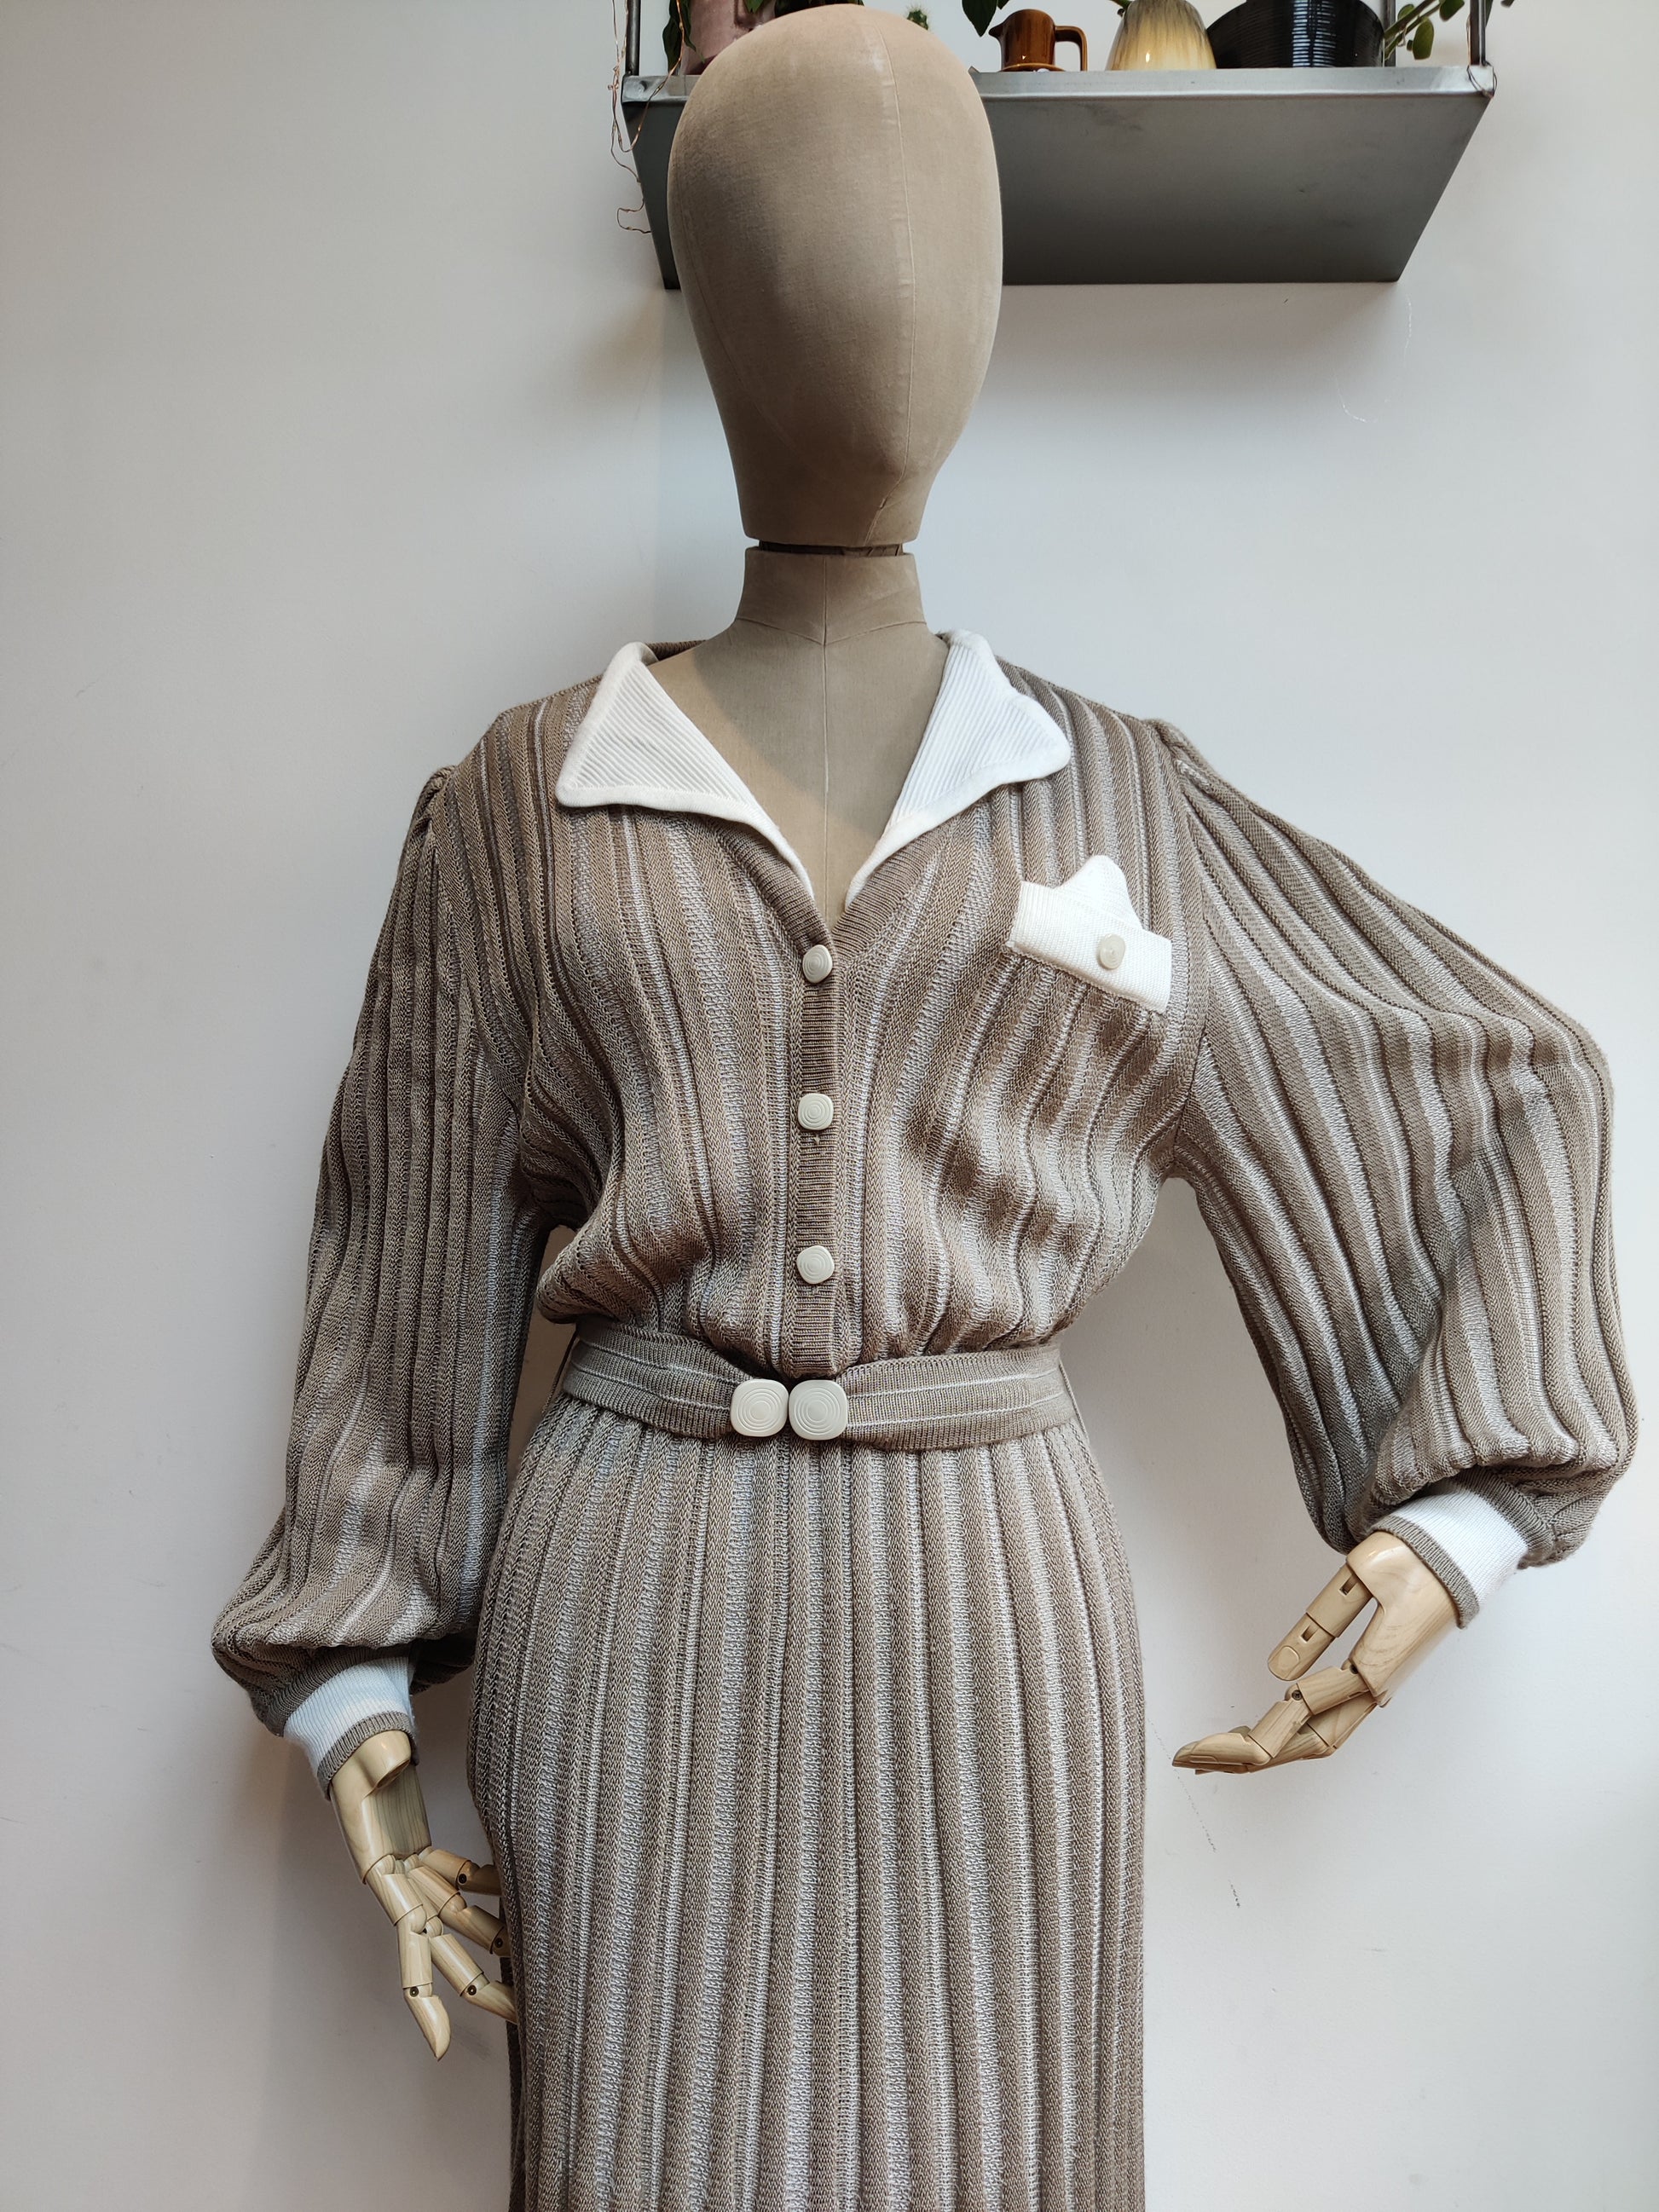 Lovely vintage Tricoville button down dress